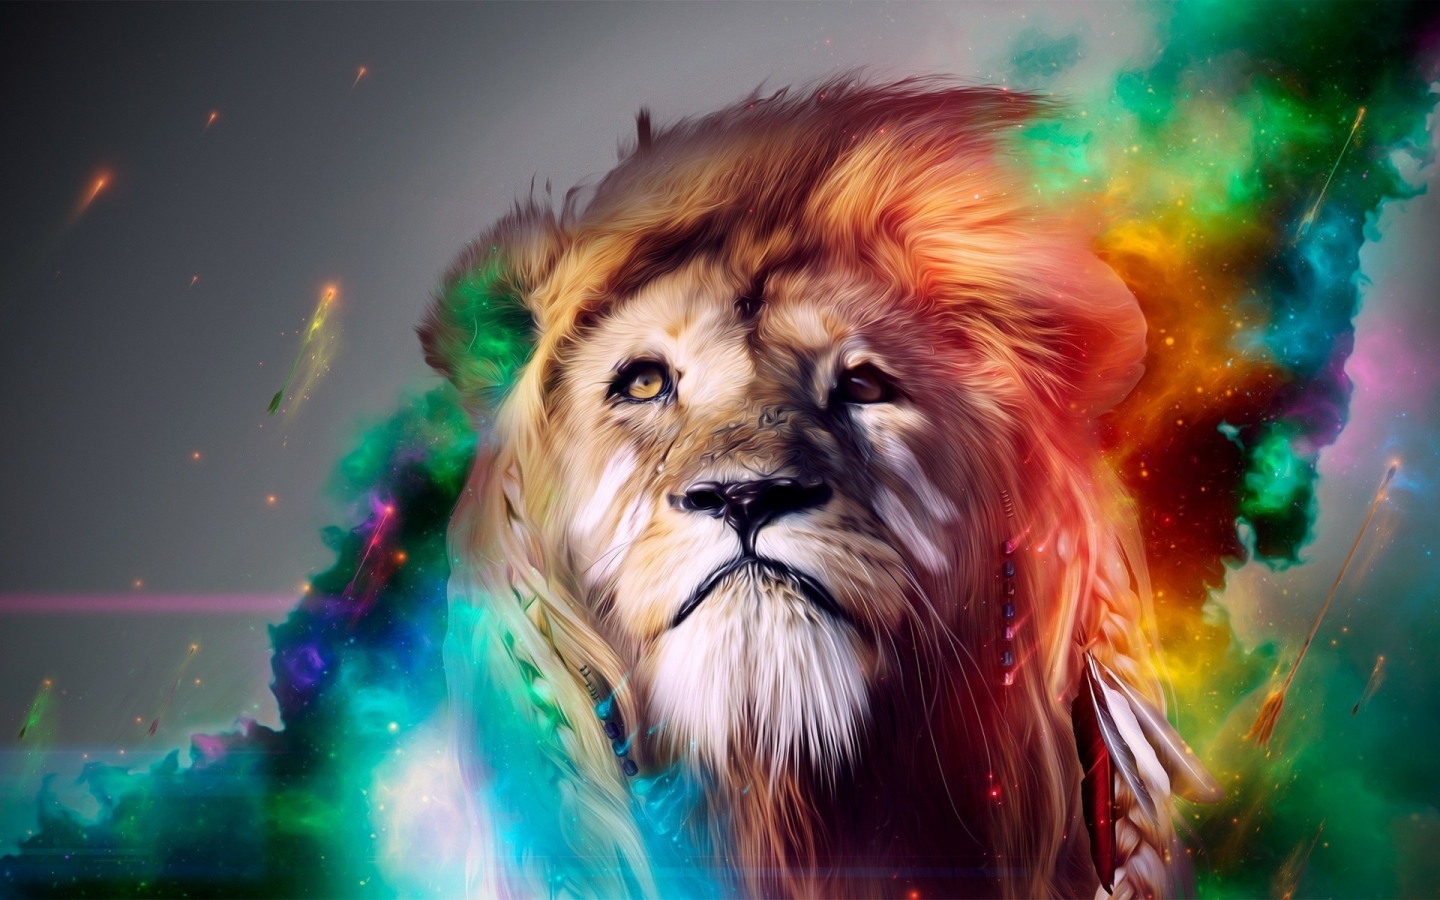 Rainbow Lion for 1440 x 900 widescreen resolution